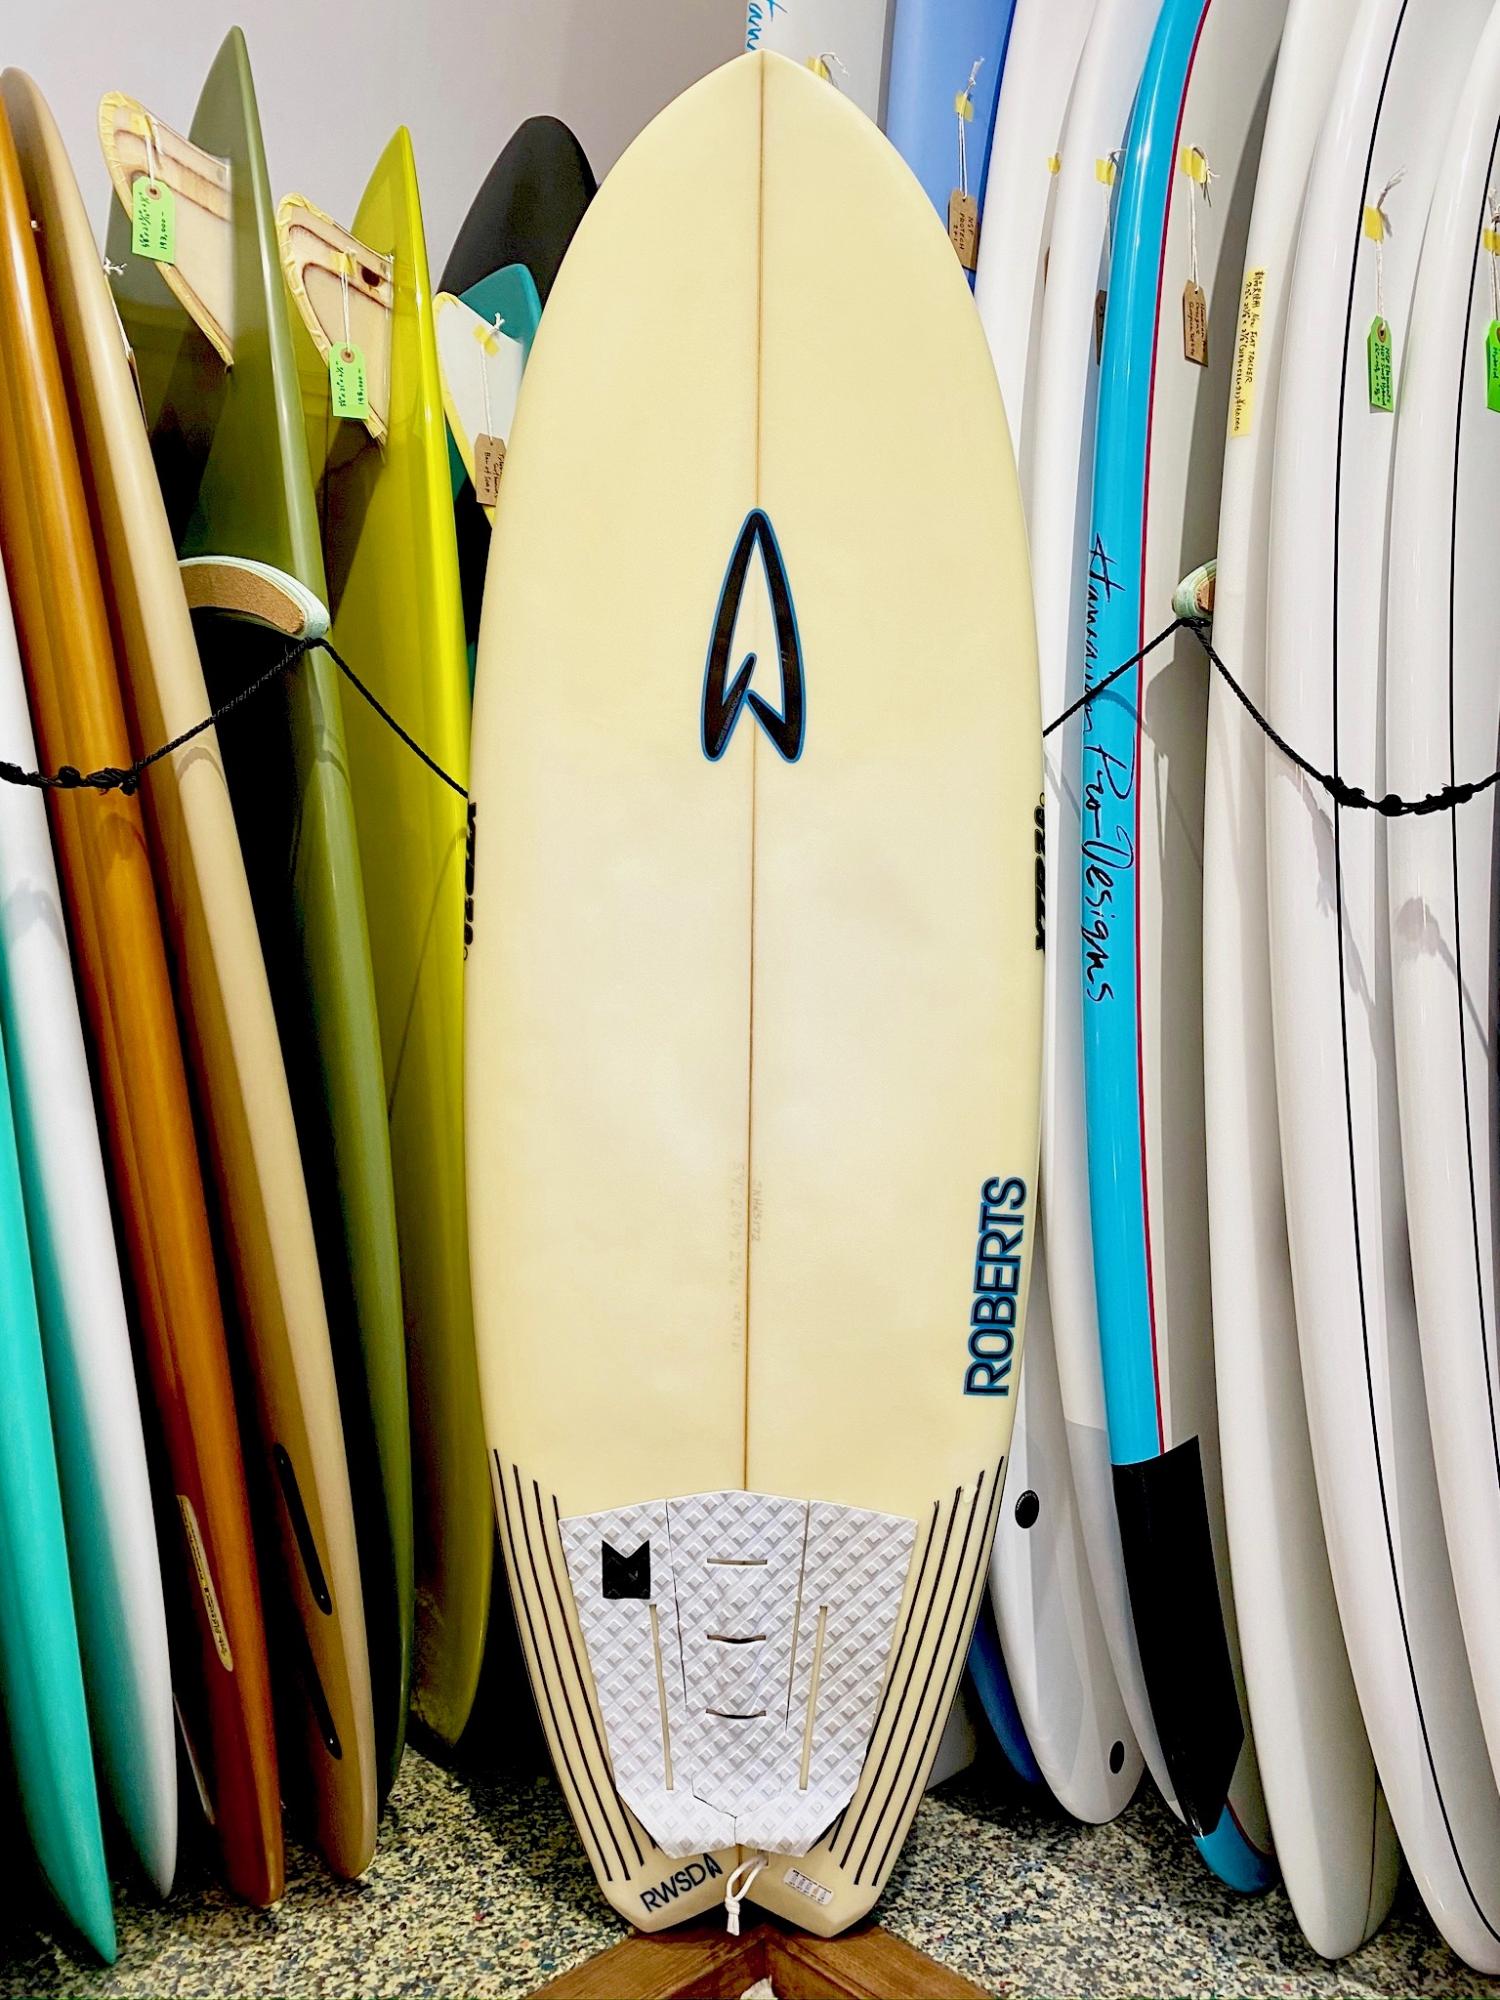 ROBERTS SURFBOARDS|Okinawa surf shop YES SURF